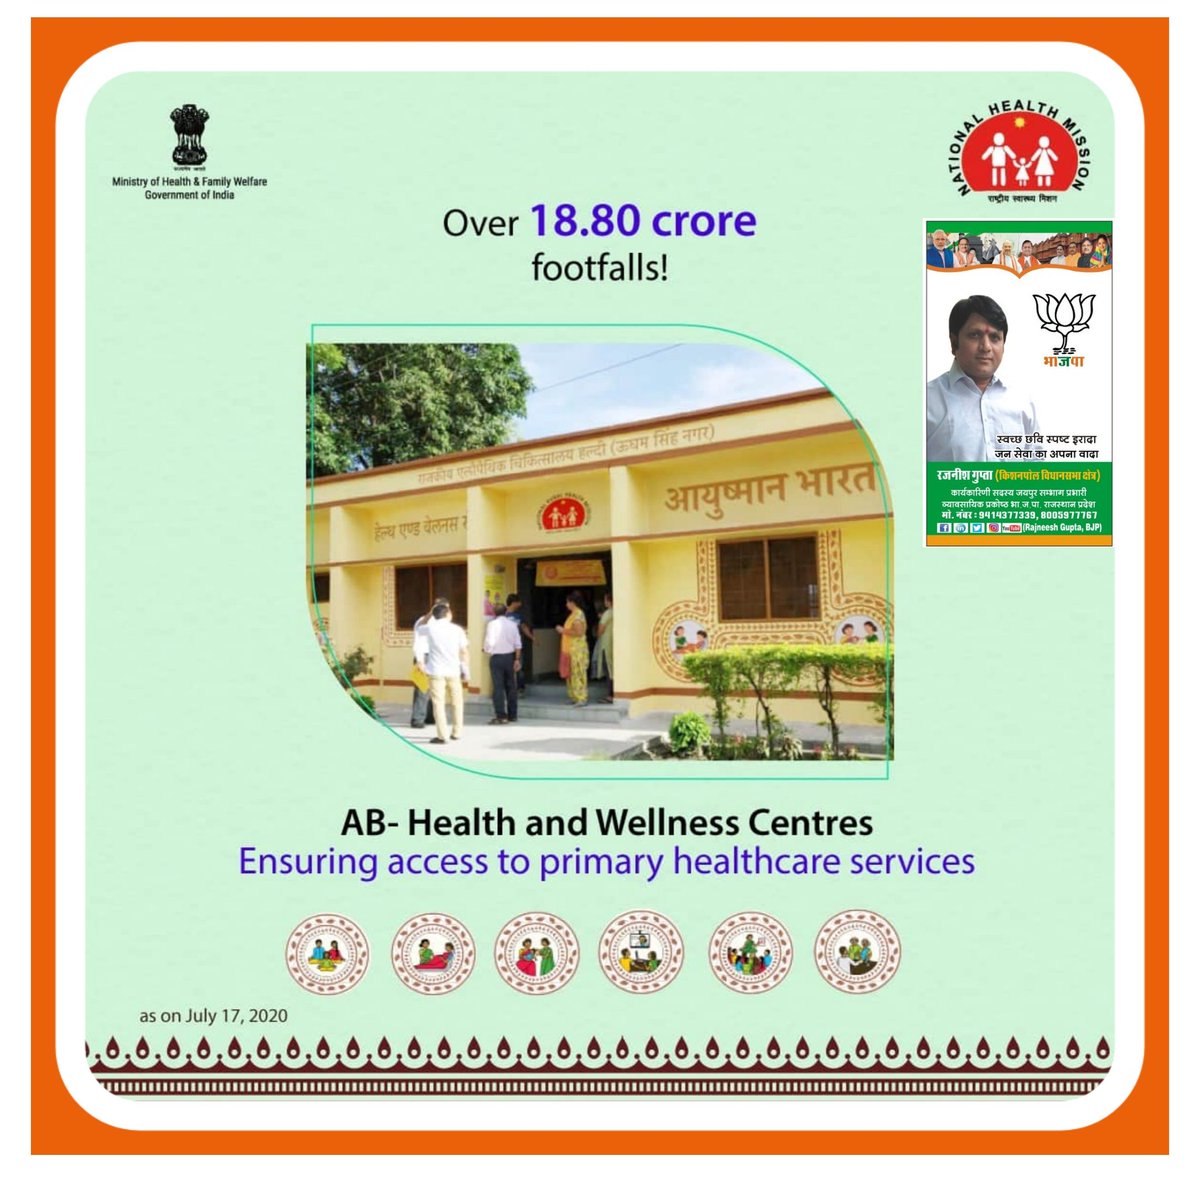 #DidYouKnow?

Over 𝟏𝟖.𝟖𝟎 crore footfalls have been recorded at #AB_HealthAndWellnessCentres
(as on July 17, 2020)
#SehatSeSafalta #SwasthaBharat